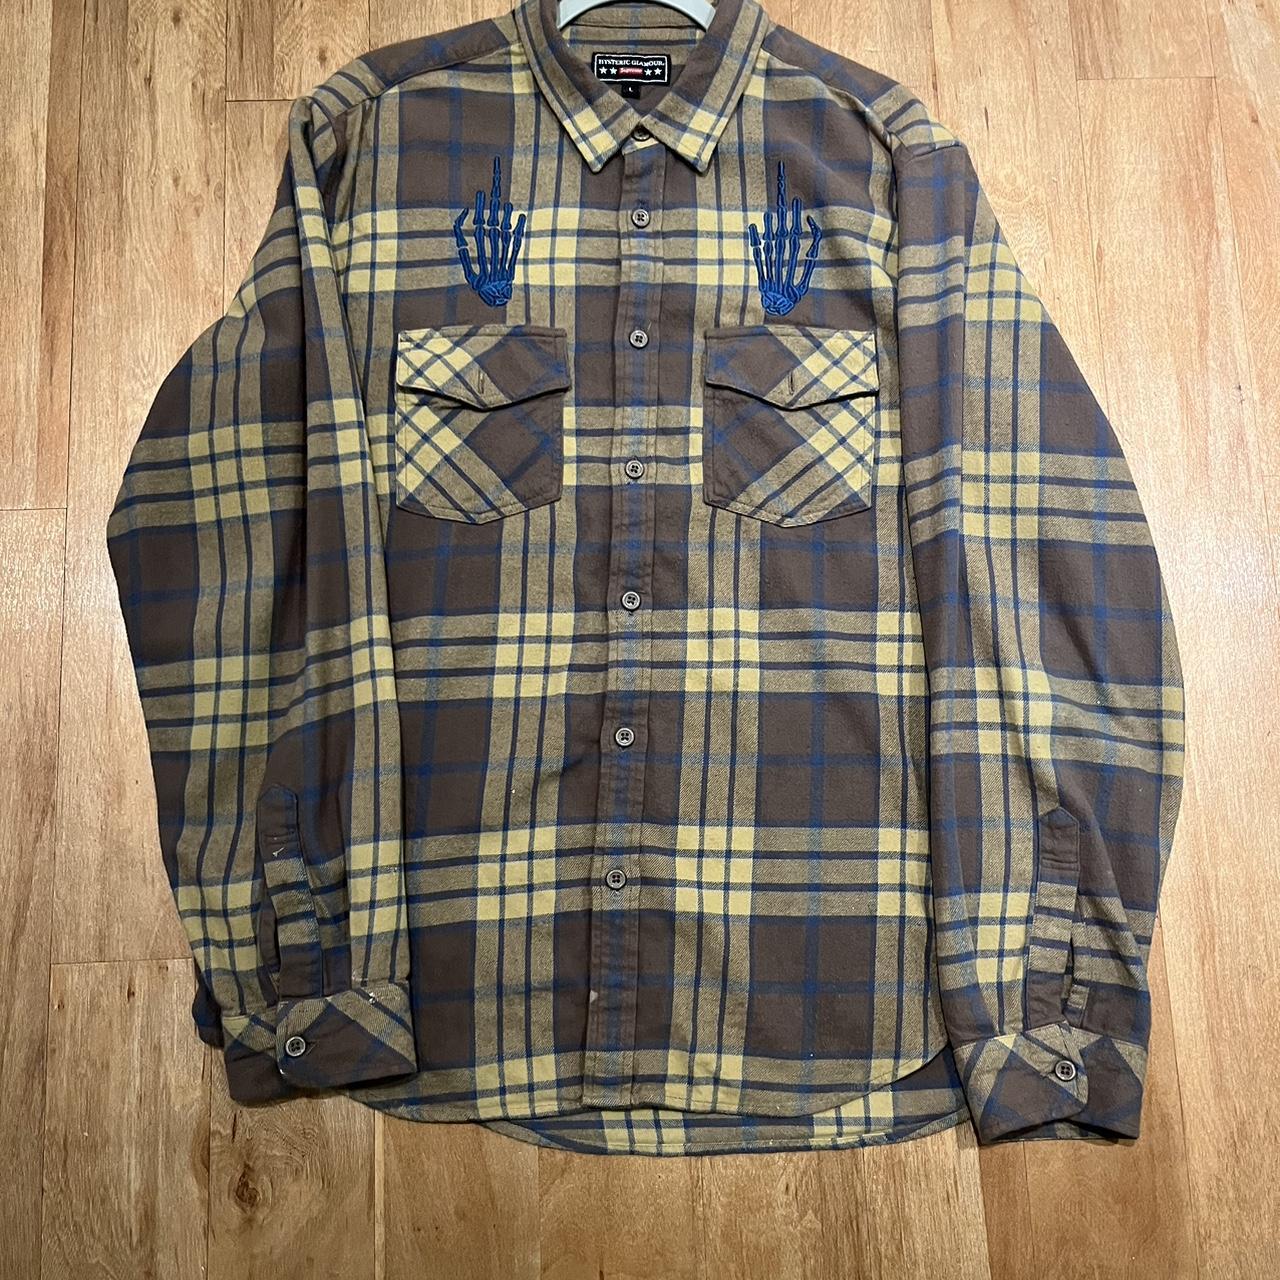 Supreme x Hysteric Glamour flannel, Size Large...